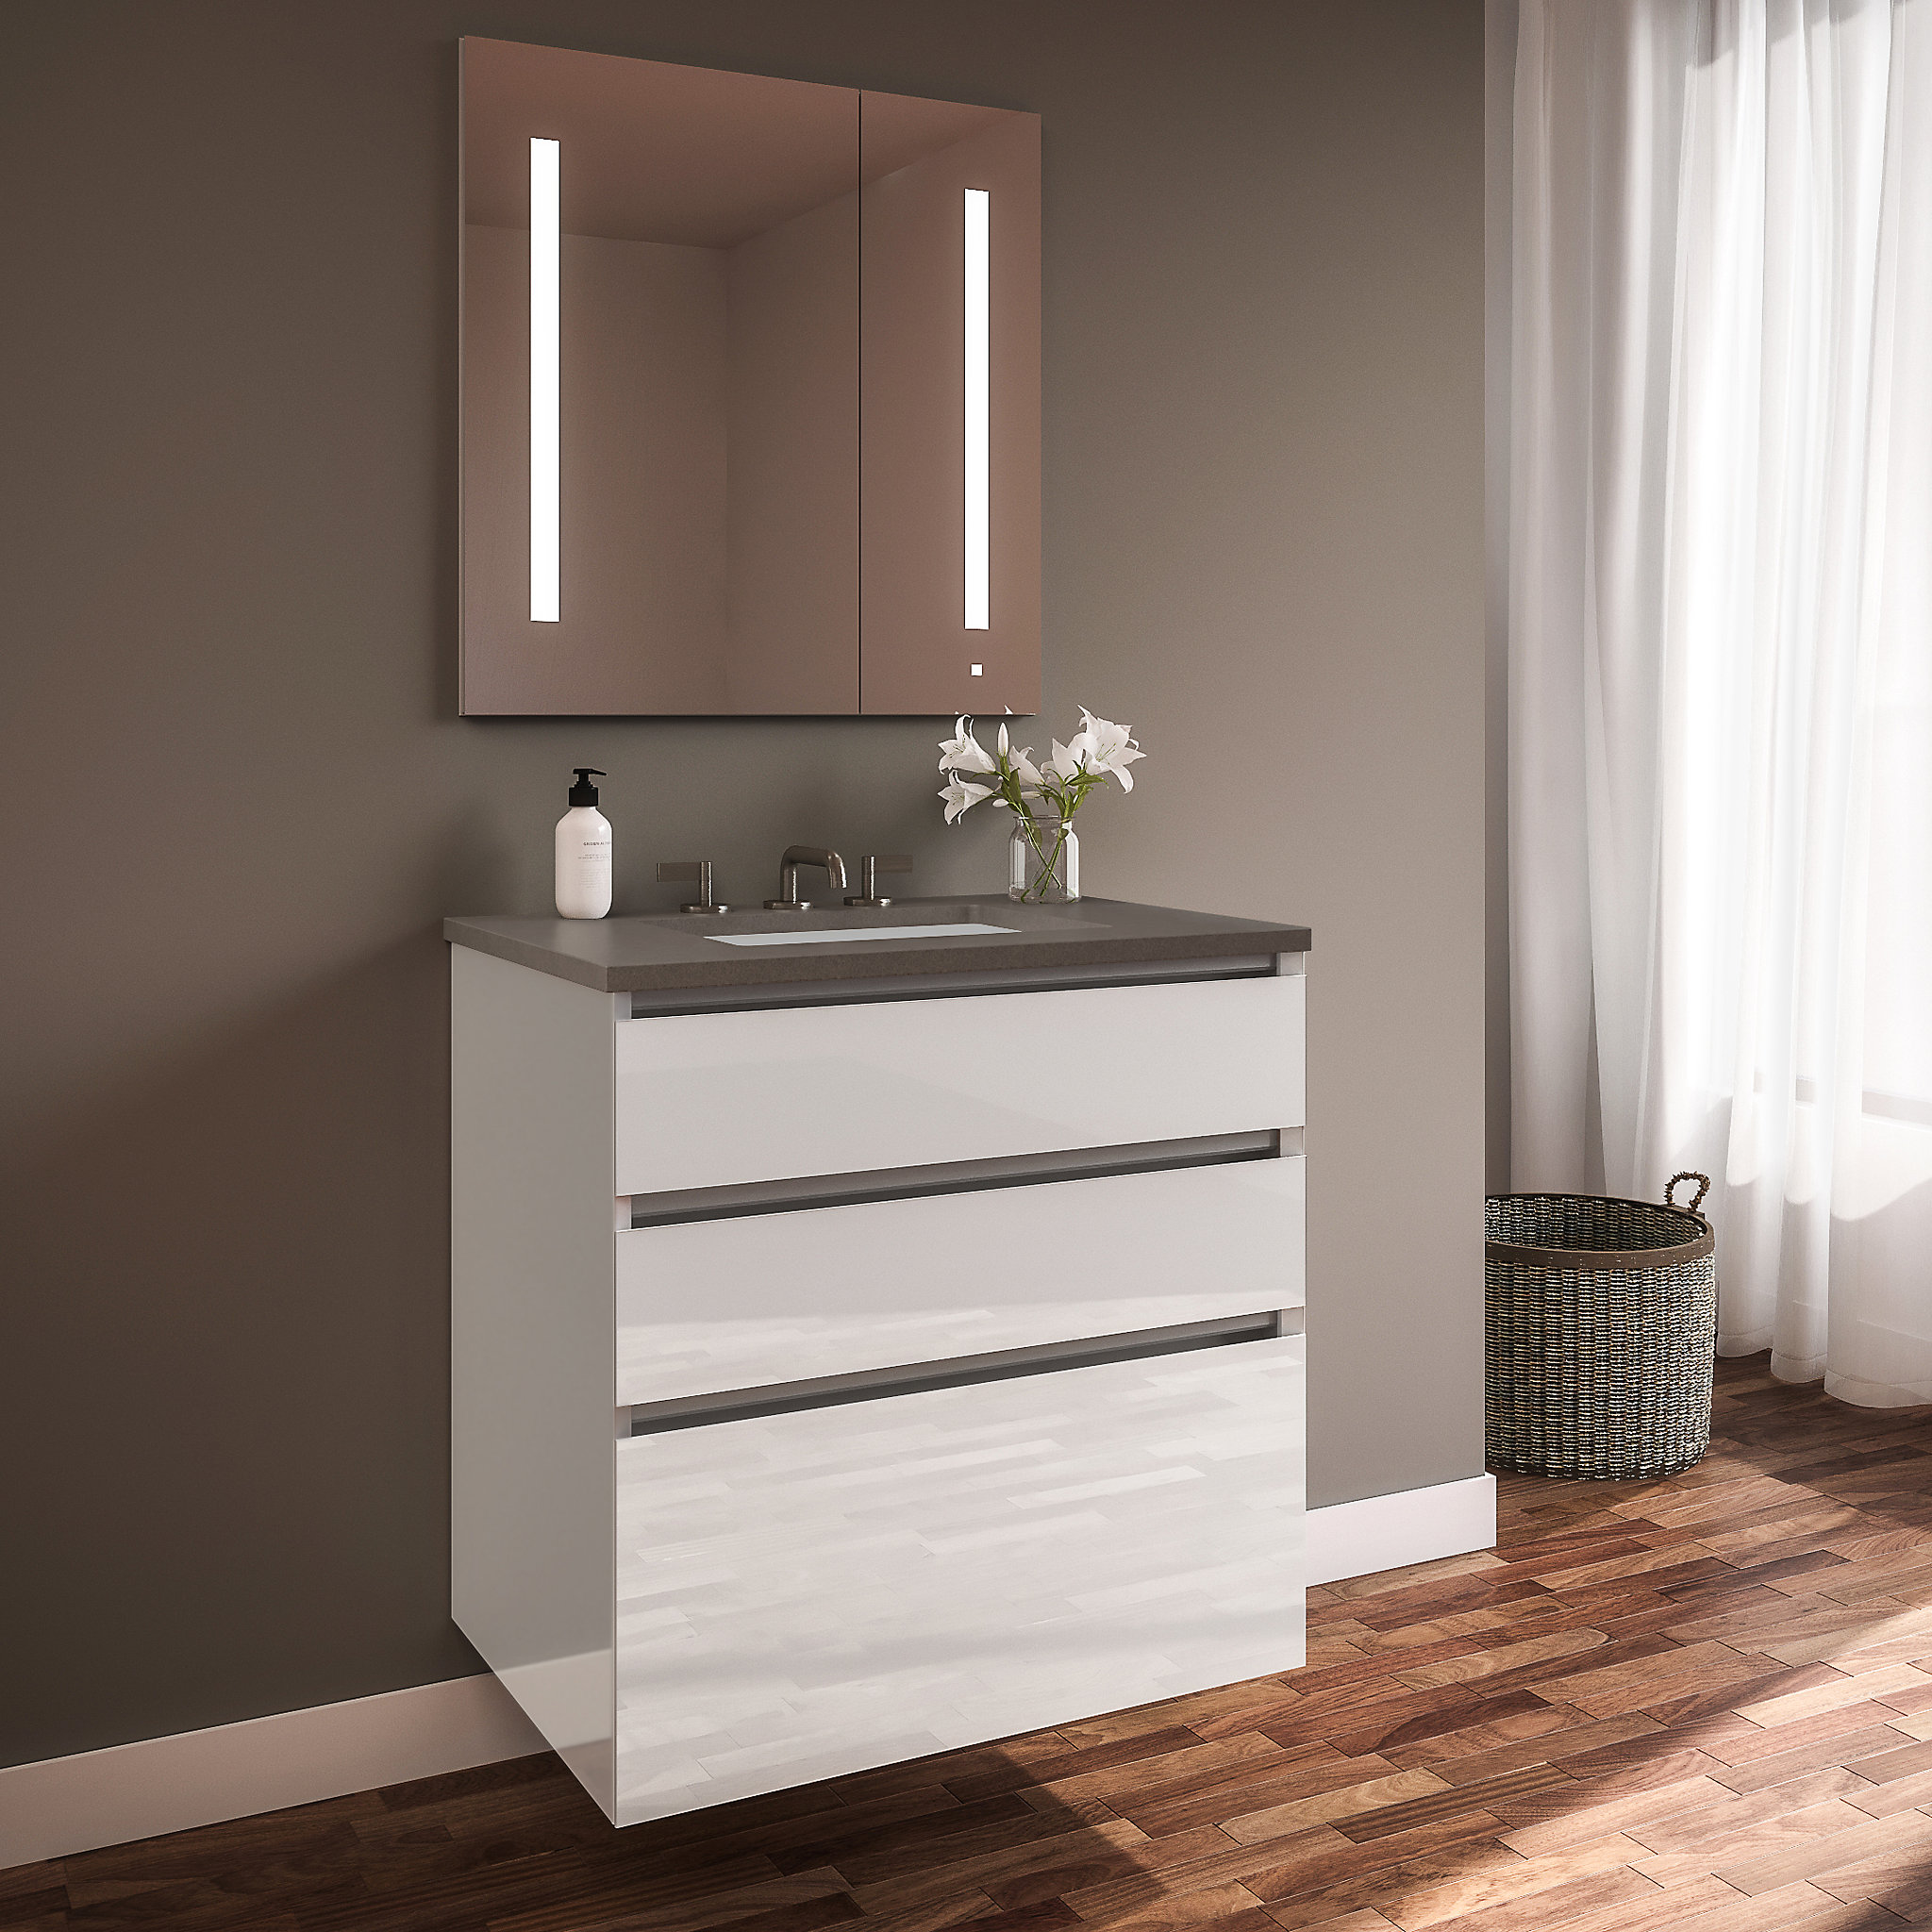 Robern 36219100NB00003 Curated Cartesian Vanity, 36" x 7-1/2" x 21", 24" x 15" x 21", Three Drawer, White Glass, Tip Out Drawer,